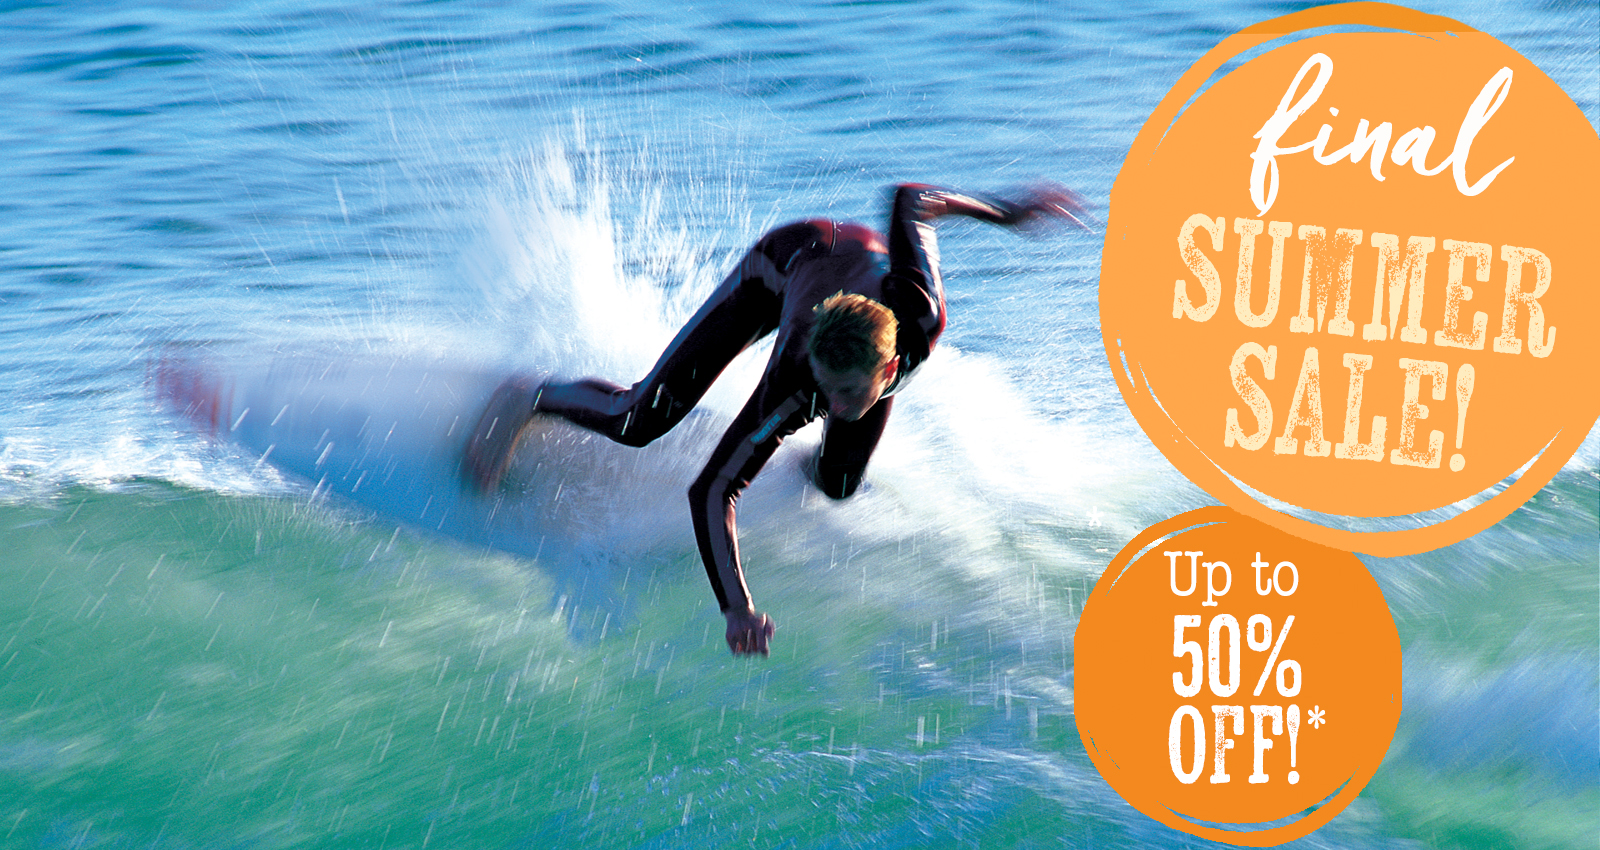 Offer 5- Up to 50% off Specialist holidays!*